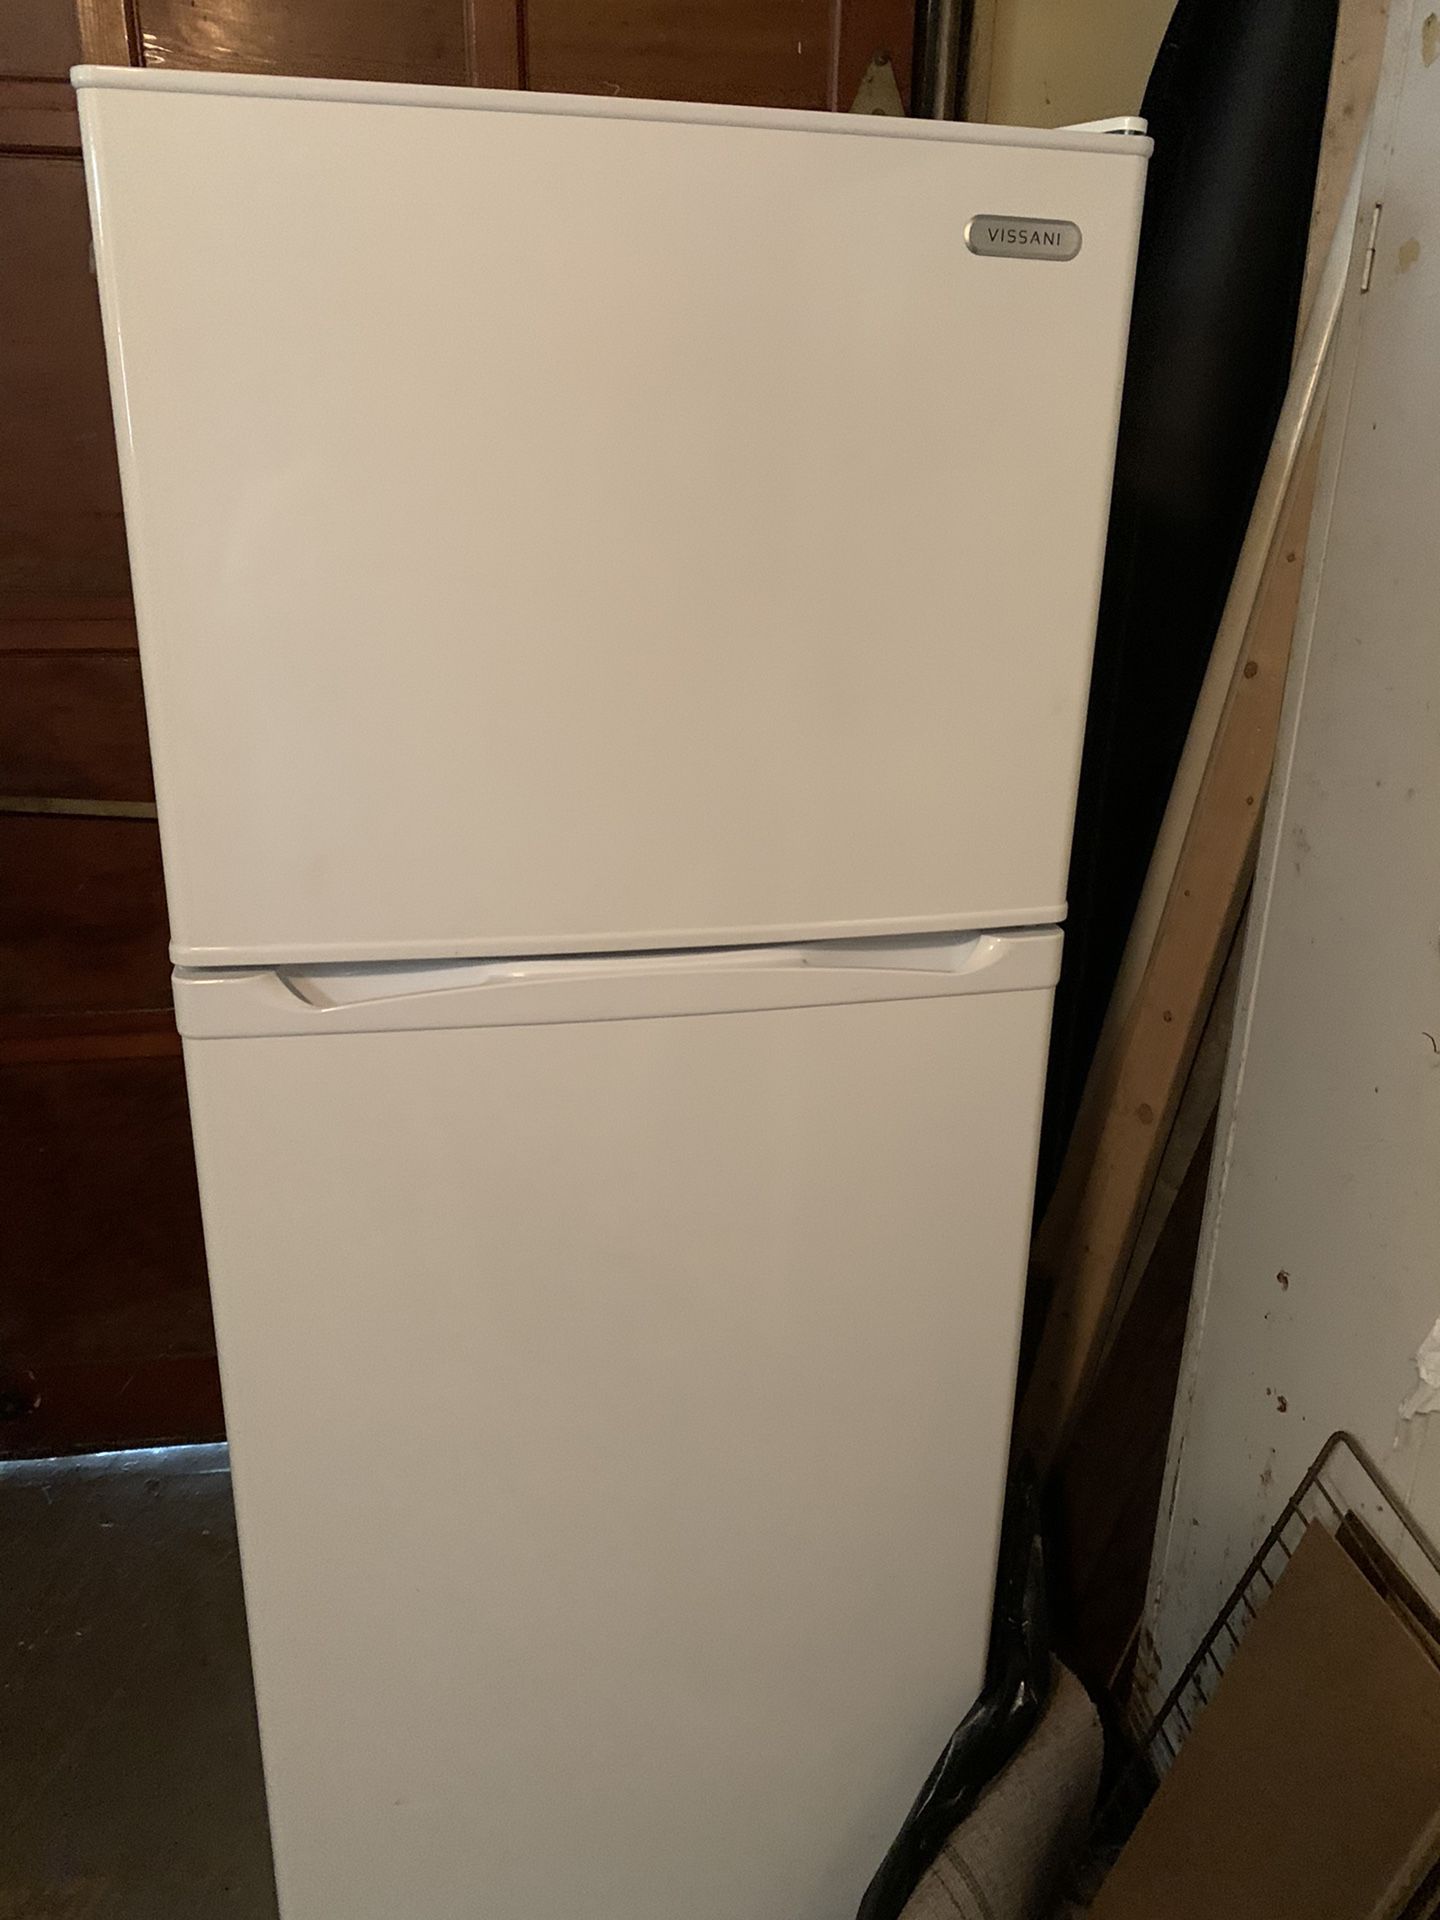 Brand new vissani refrigerator 59/24 inches wide, perfect for office or apartment.